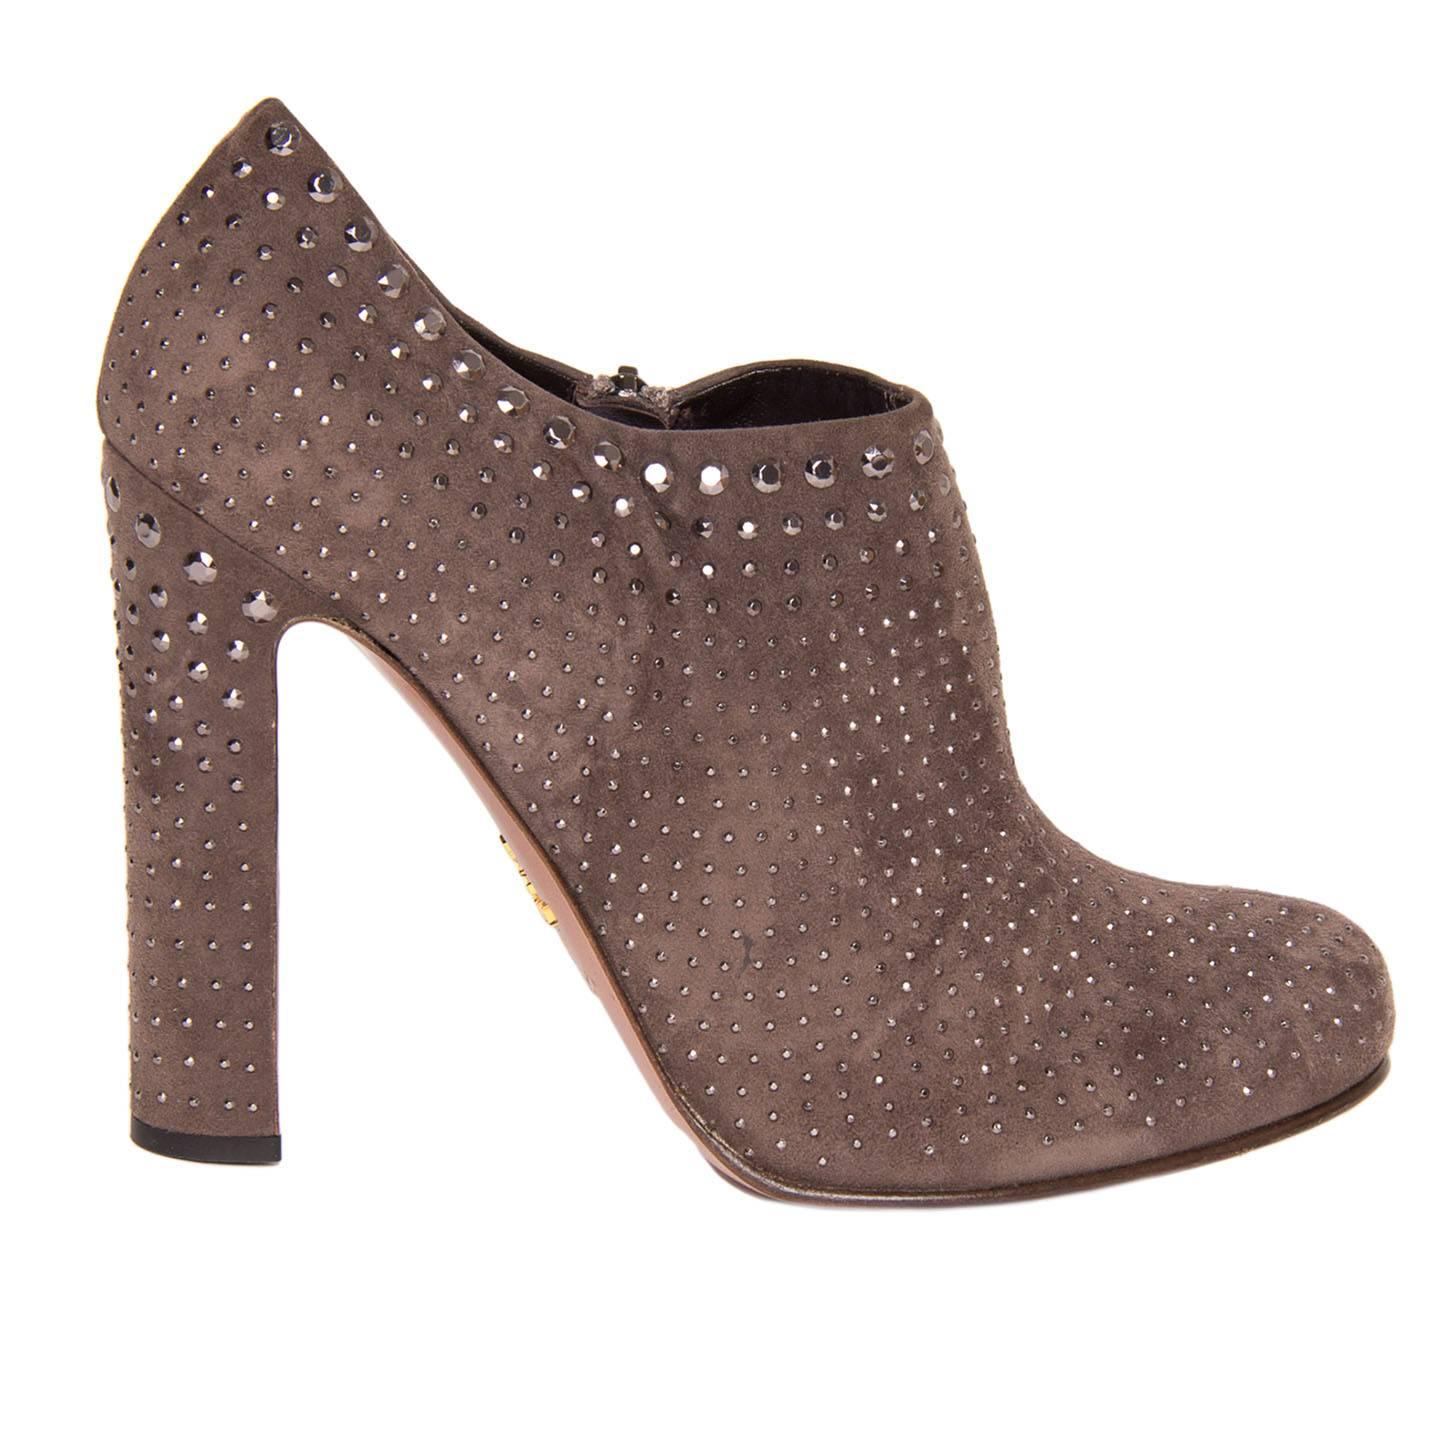 Prada Brown Suede & Crystals Ankle Boots